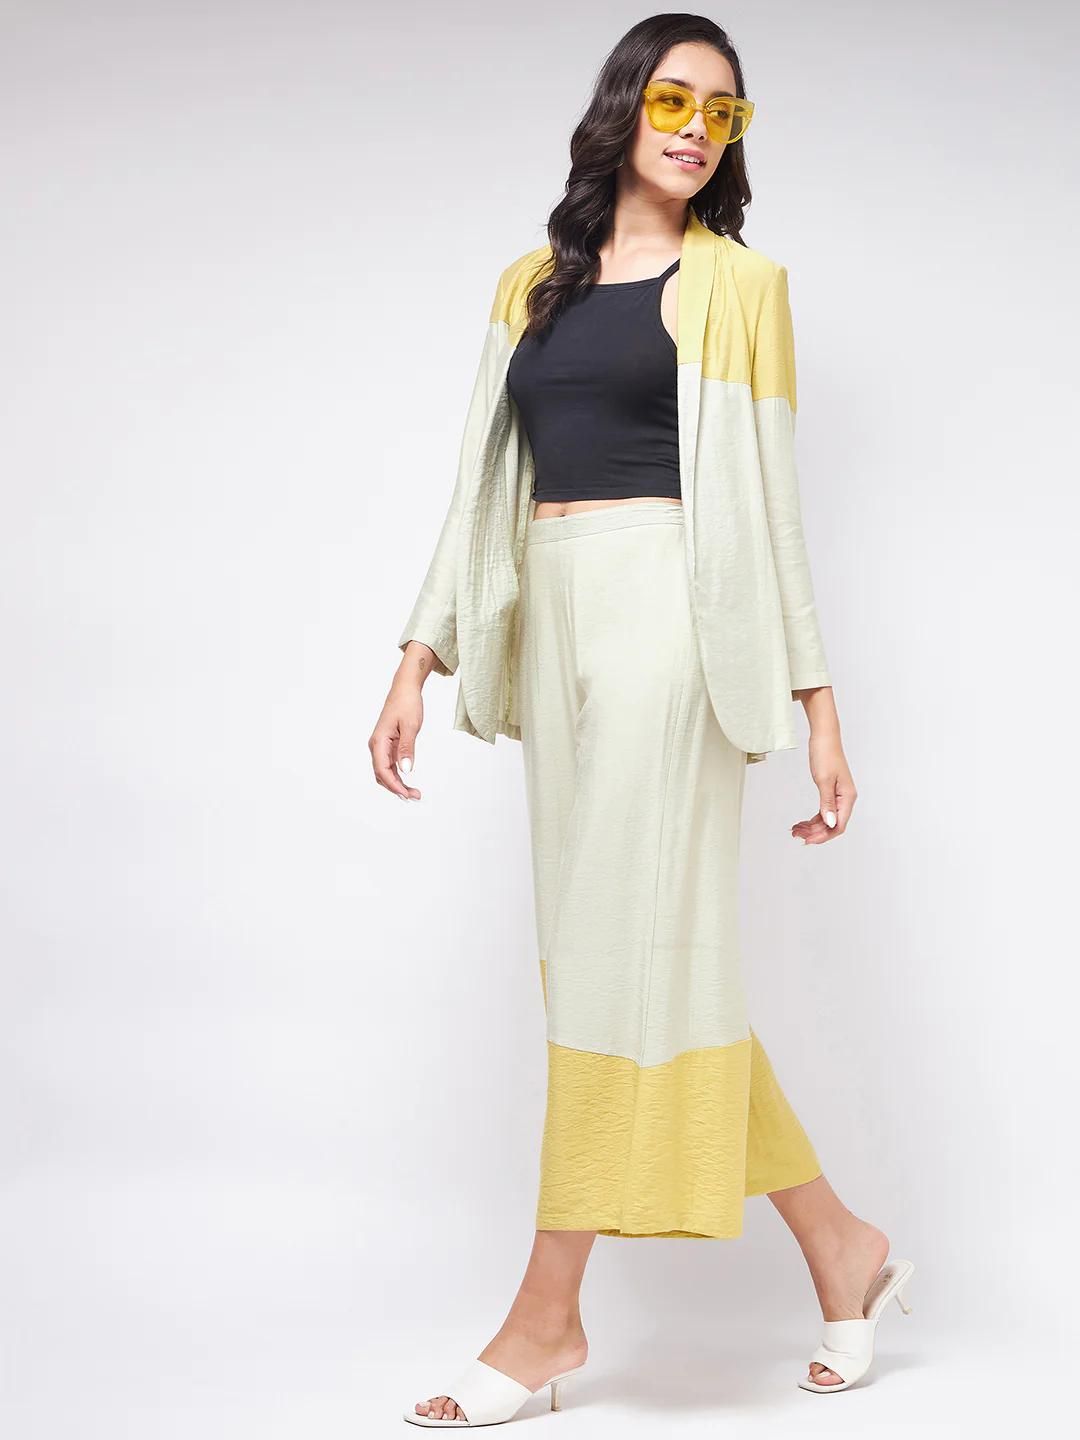 PANNKH Pista Green Flaunt Yourself In Solid Colorblock Blazer With Matching Pants Set